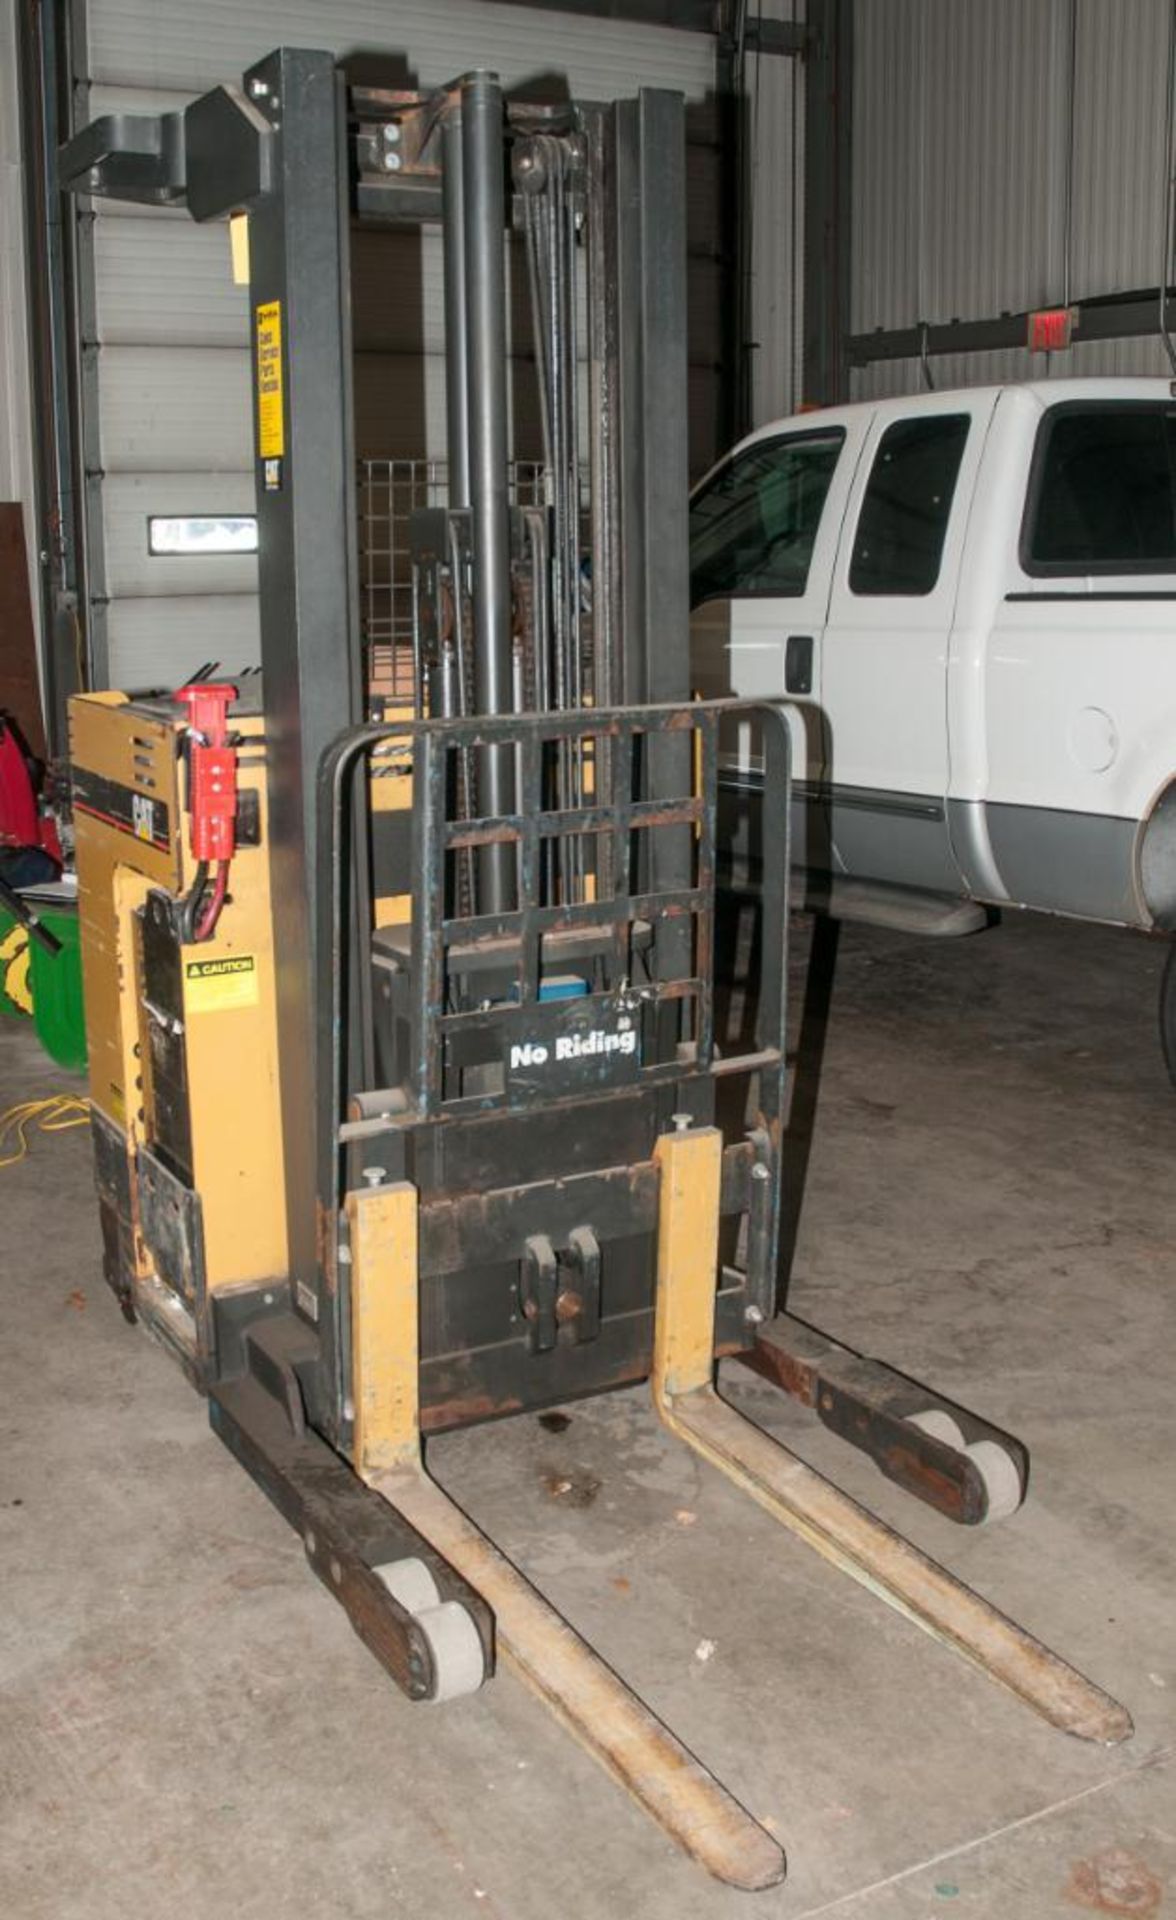 Cat 24v Narrow Aisle Single Reach Stand-up Forklift Mdl NRR30, s/n 2NL07549, 3000 lb Cap, 204" Max. - Image 2 of 4